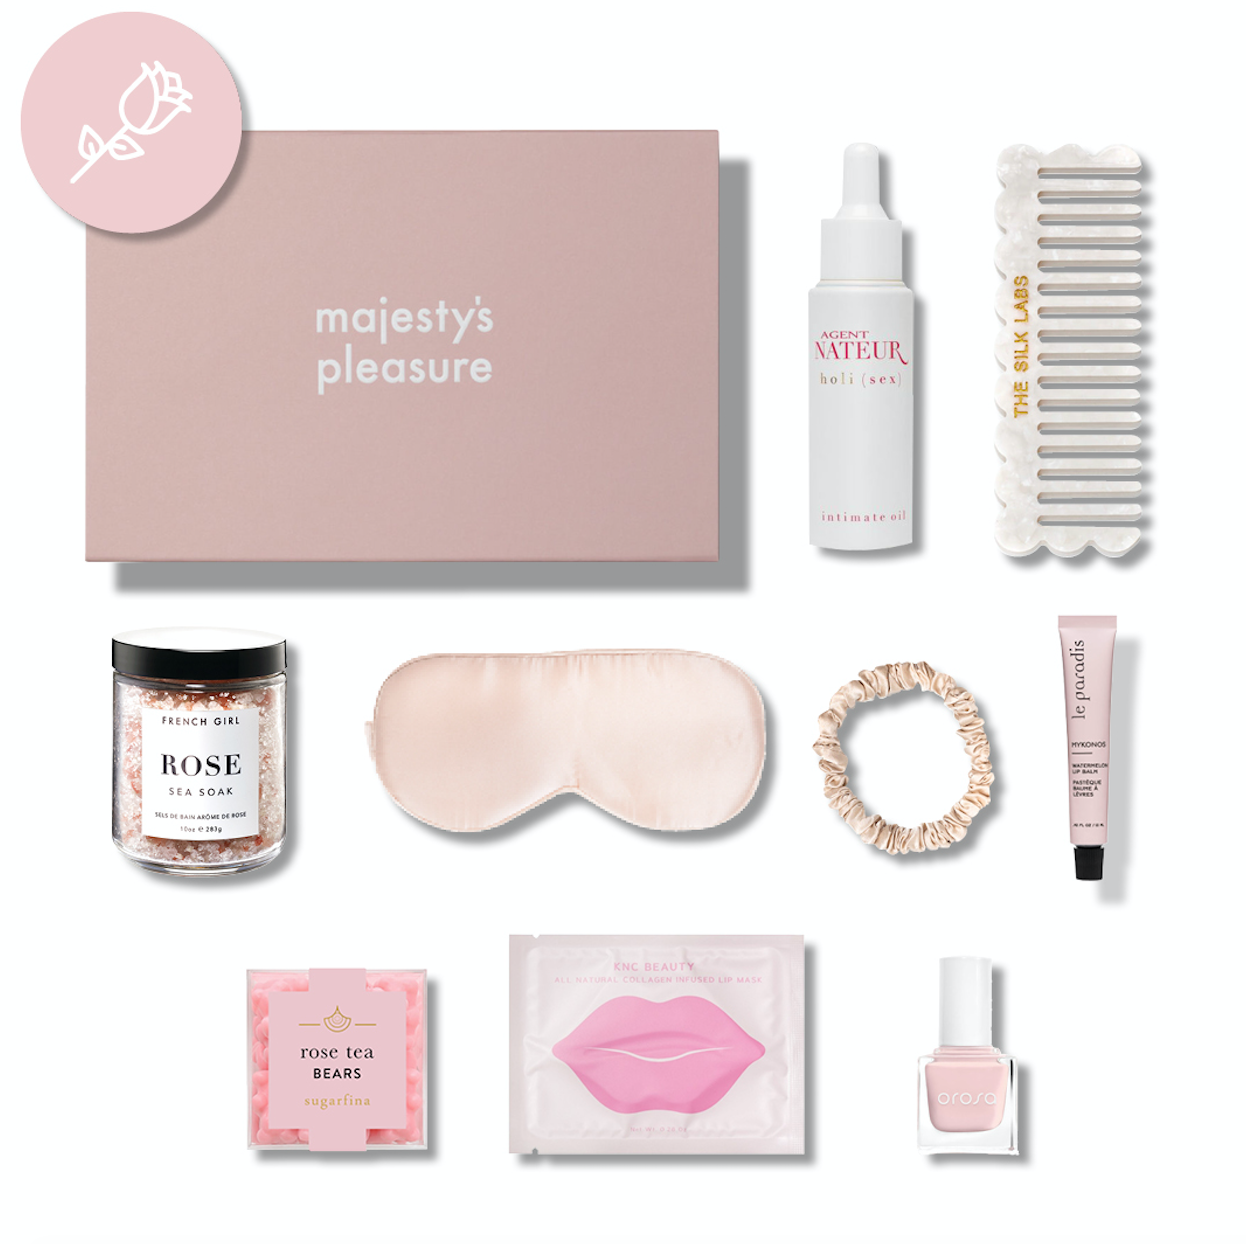 A Beauty and Self-Care Lover’s Dream Valentine’s Gift Guide